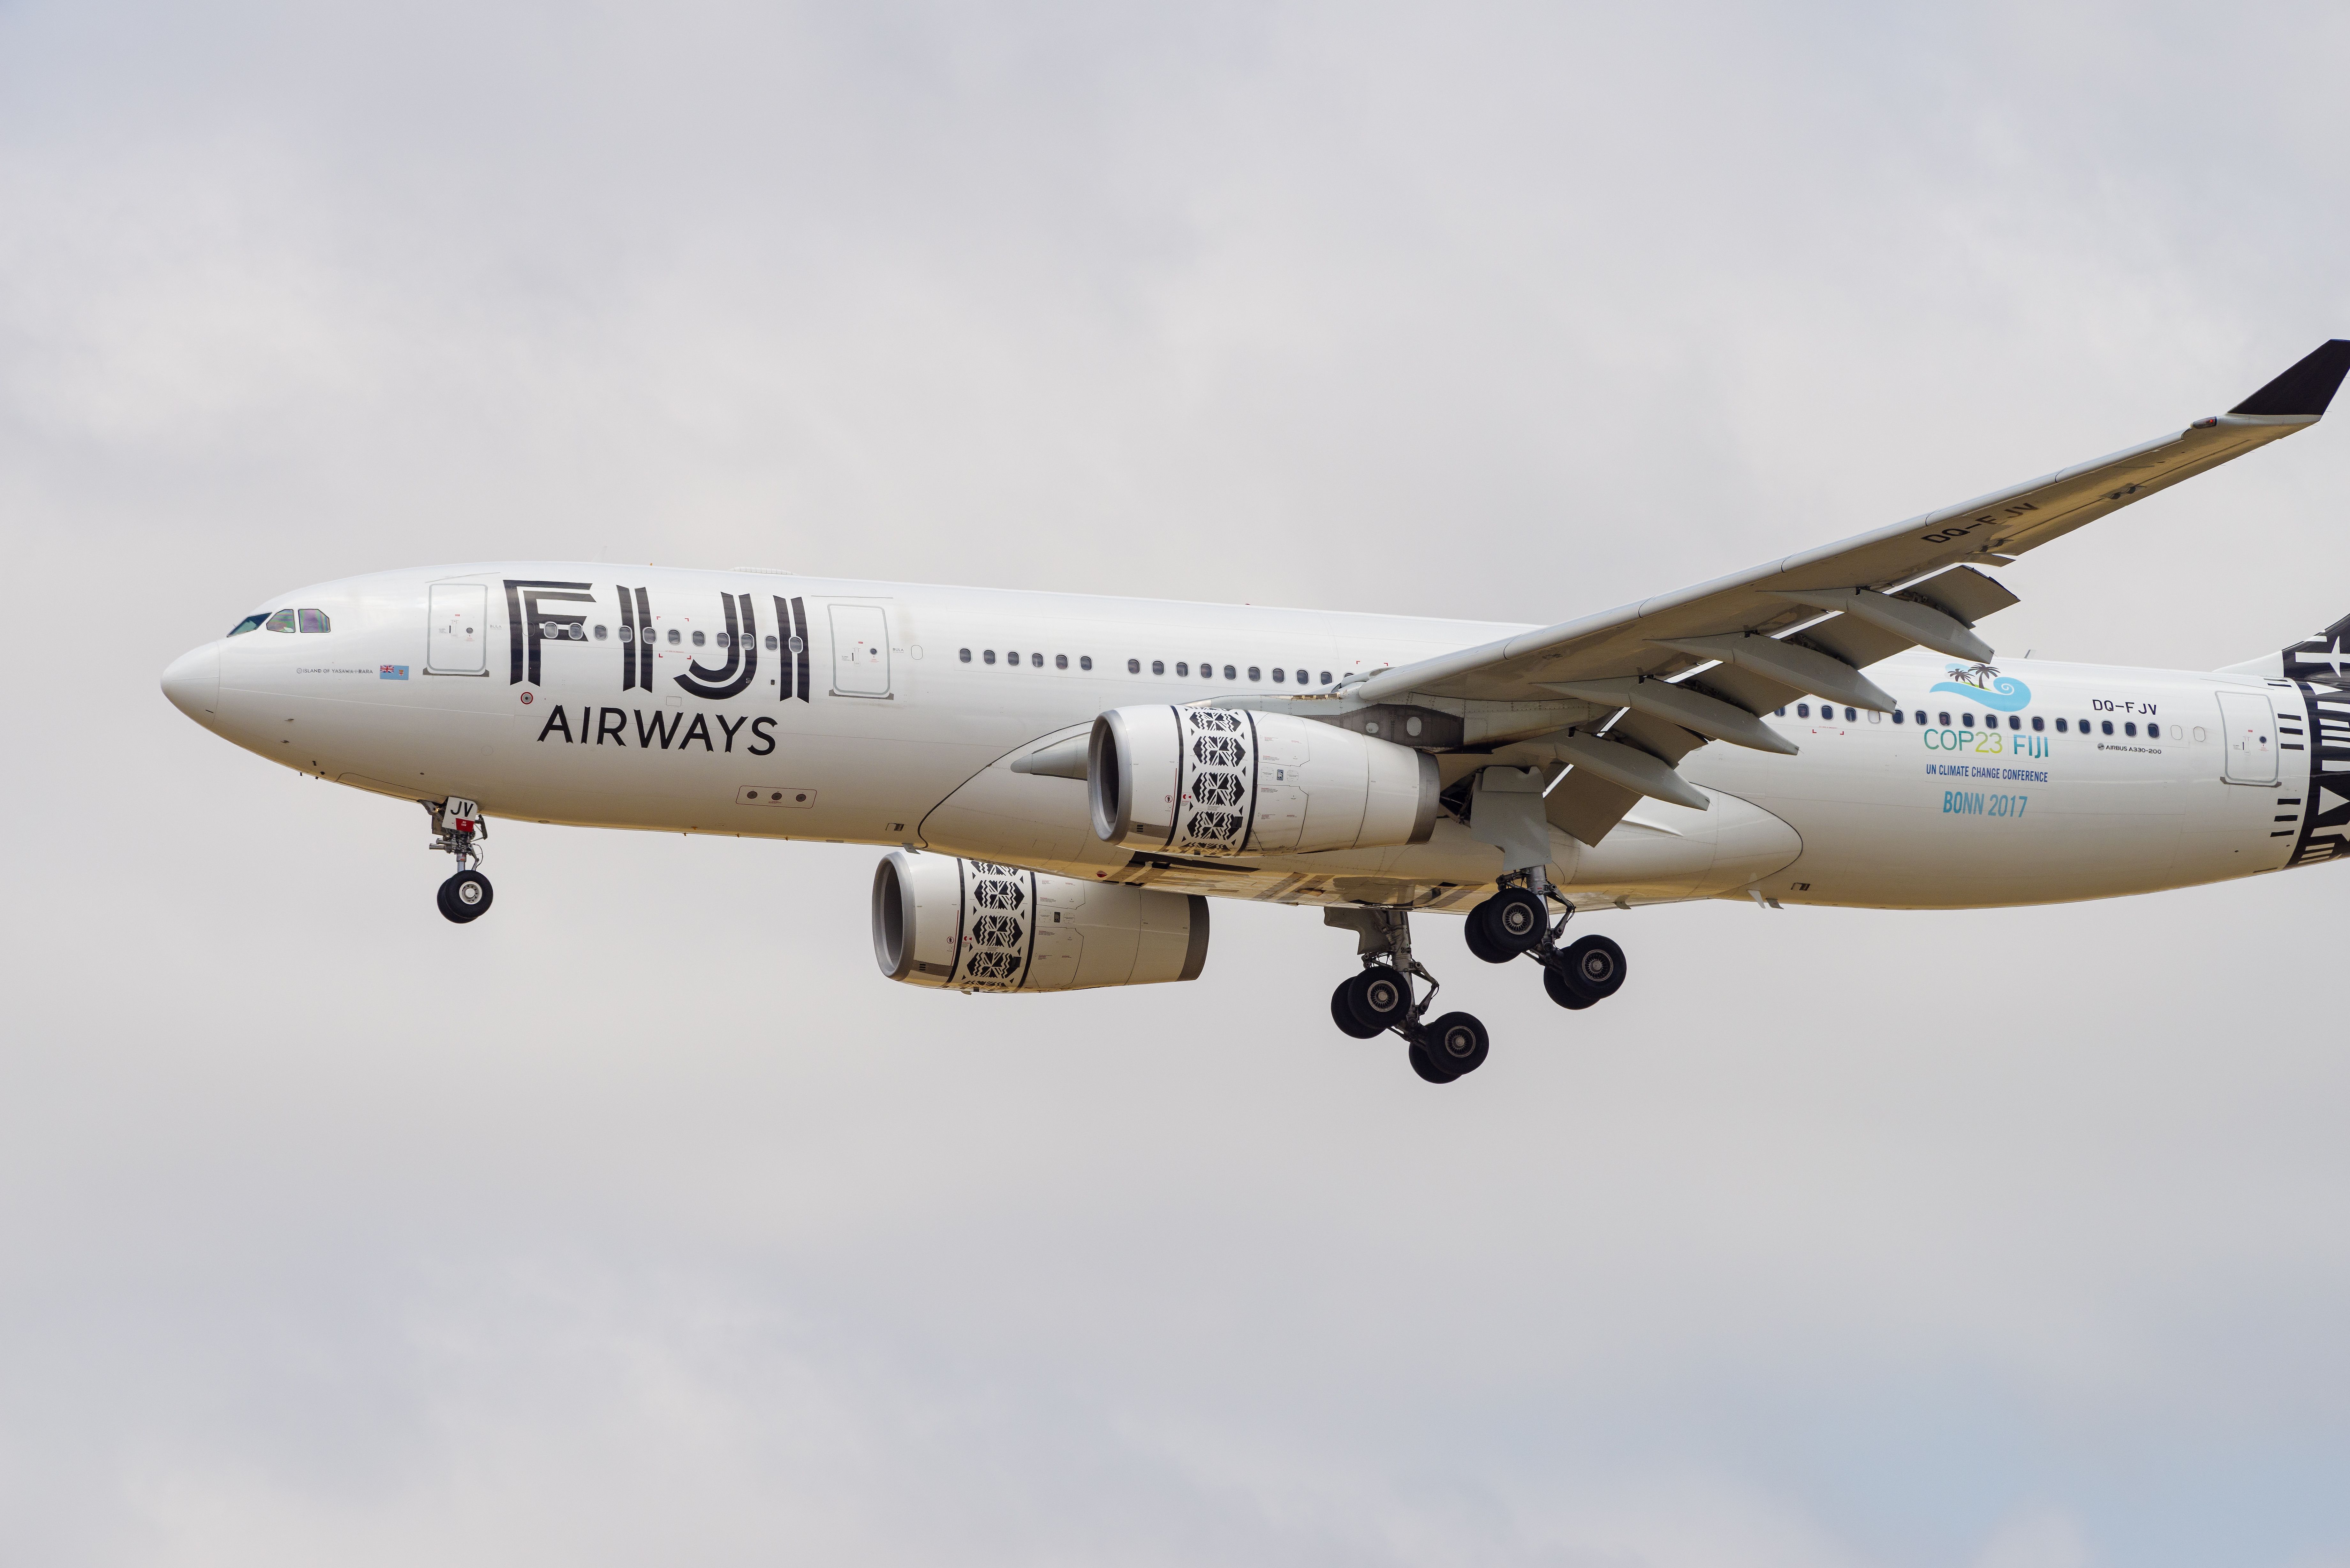 Fiji Airways aircraft (Airbus A330-200) descending toward LAX for landing. Special 'COP23 FIJI un climate change conference Bonn 2017' livery.